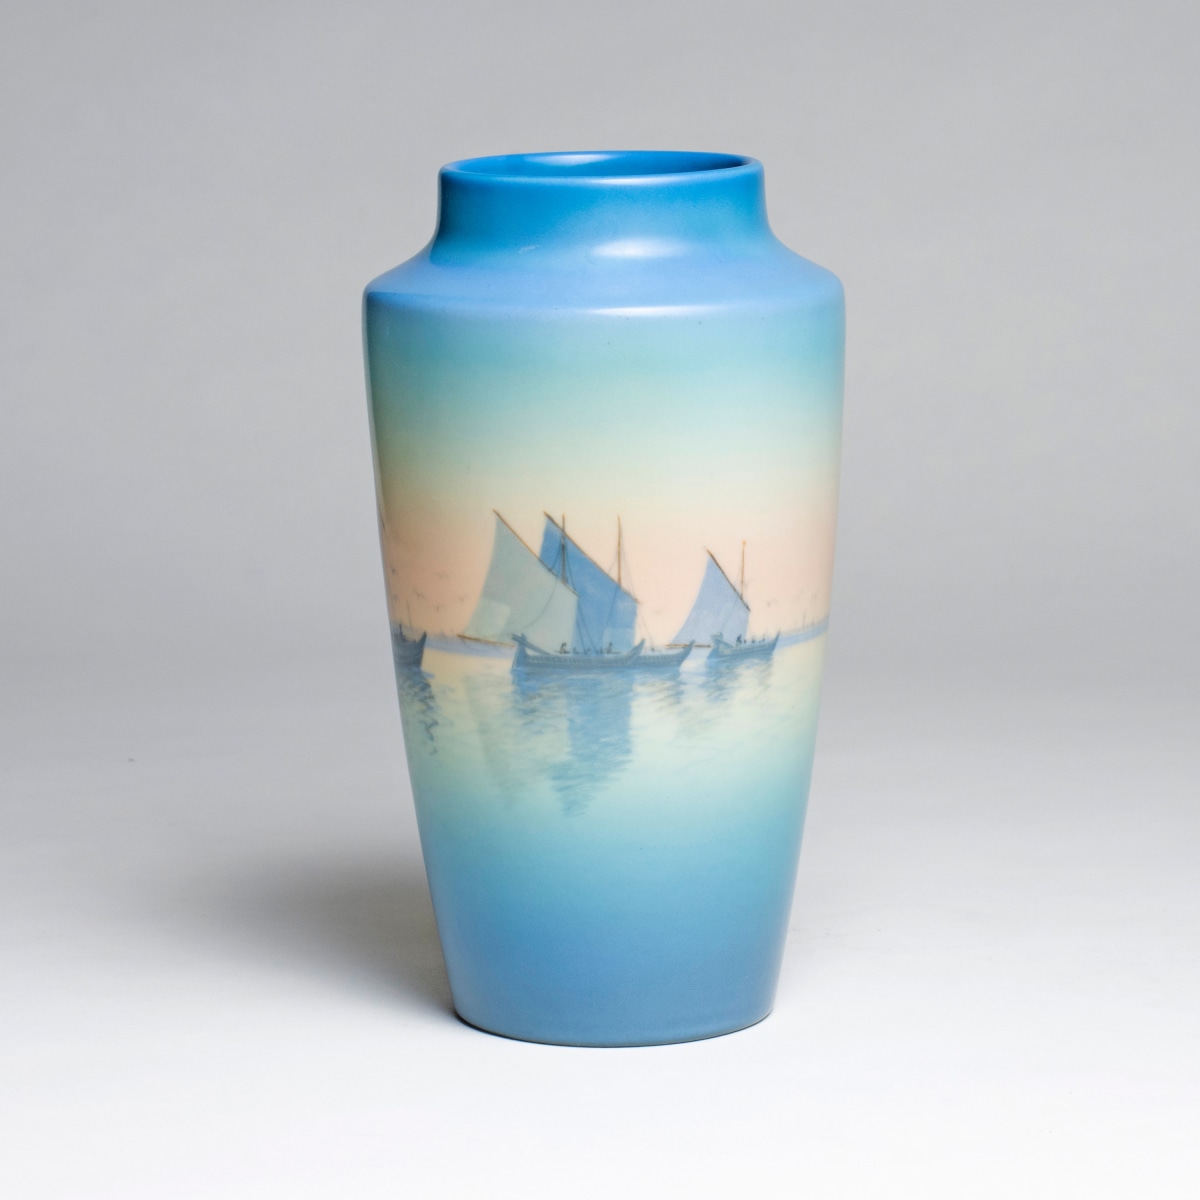 a glazed ceramic vase by carl schmidt for rookwood pottery in the scenic vellum glaze depicting a harbor scattered with ships with gradient sky